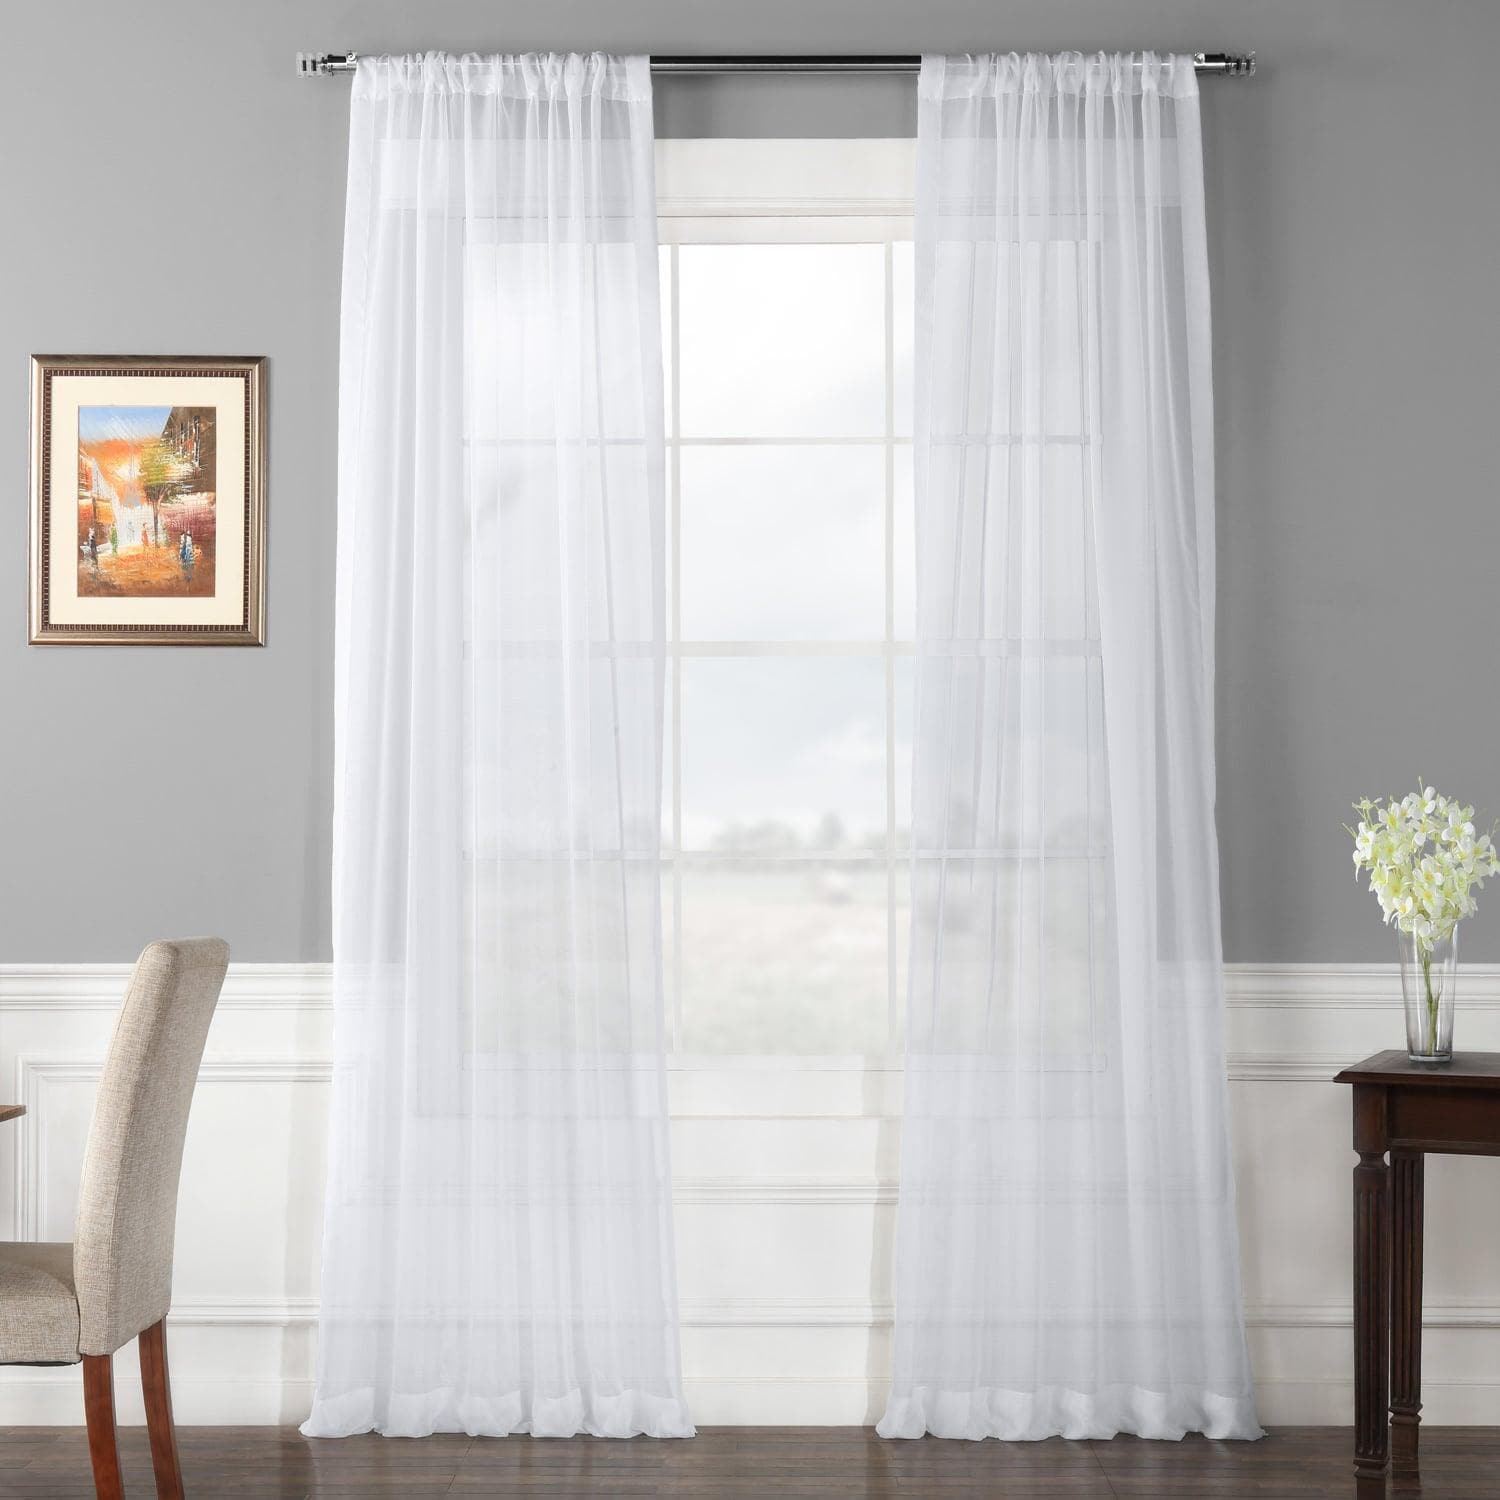 Solid White Voile Sheer Curtain Pair (2 Panels)